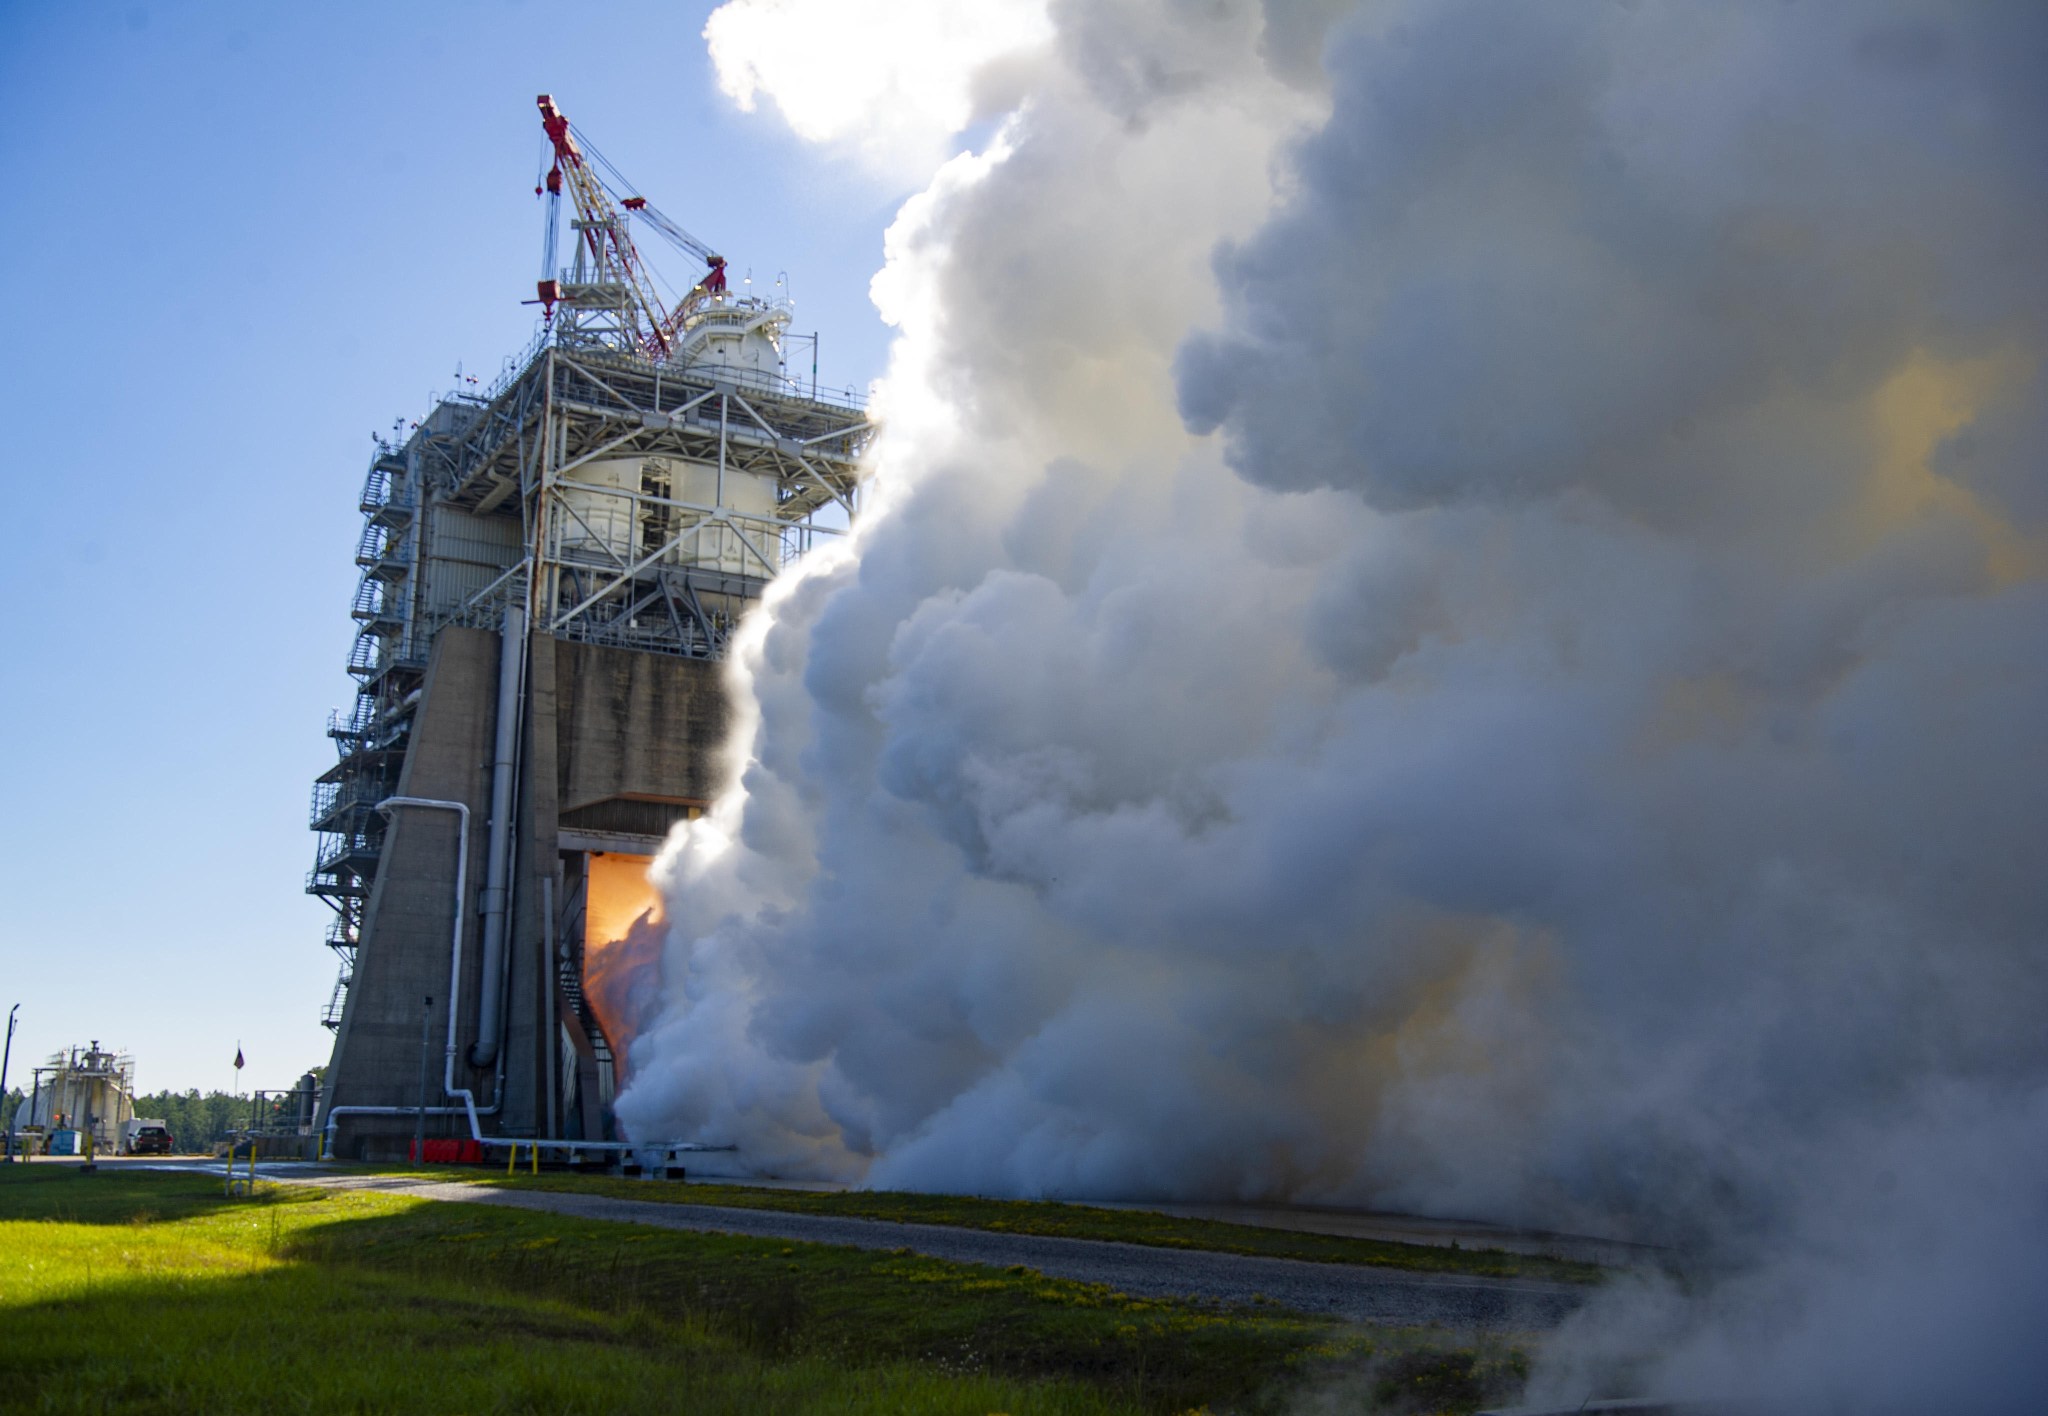 A full duration test of the RS-25 certification engine was conducted at NASA's Stennis Space Center on October 17, 2023.